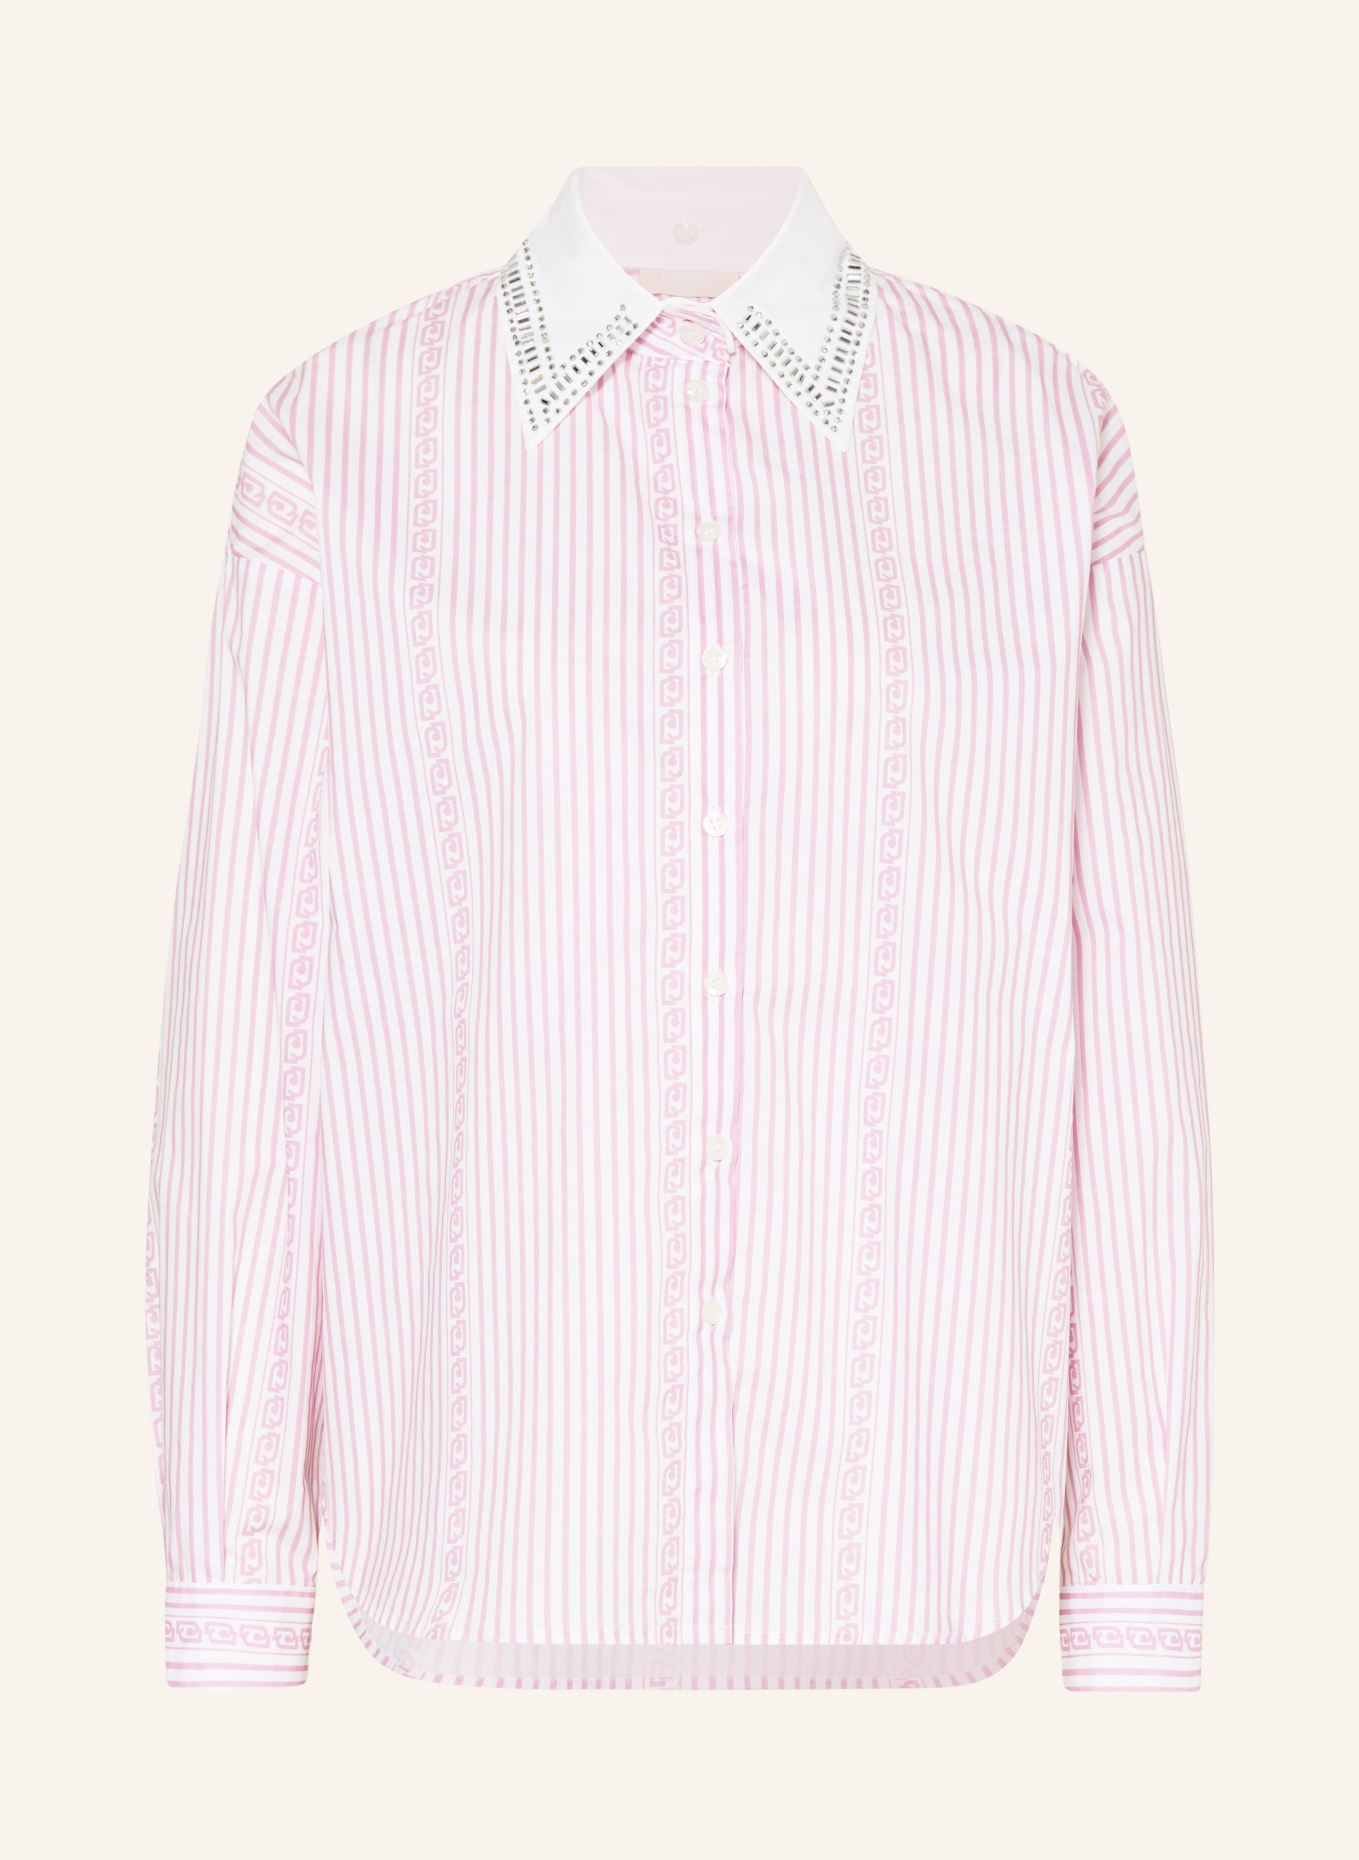 LIU JO Shirt blouse with decorative gems, Color: PINK/ WHITE (Image 1)